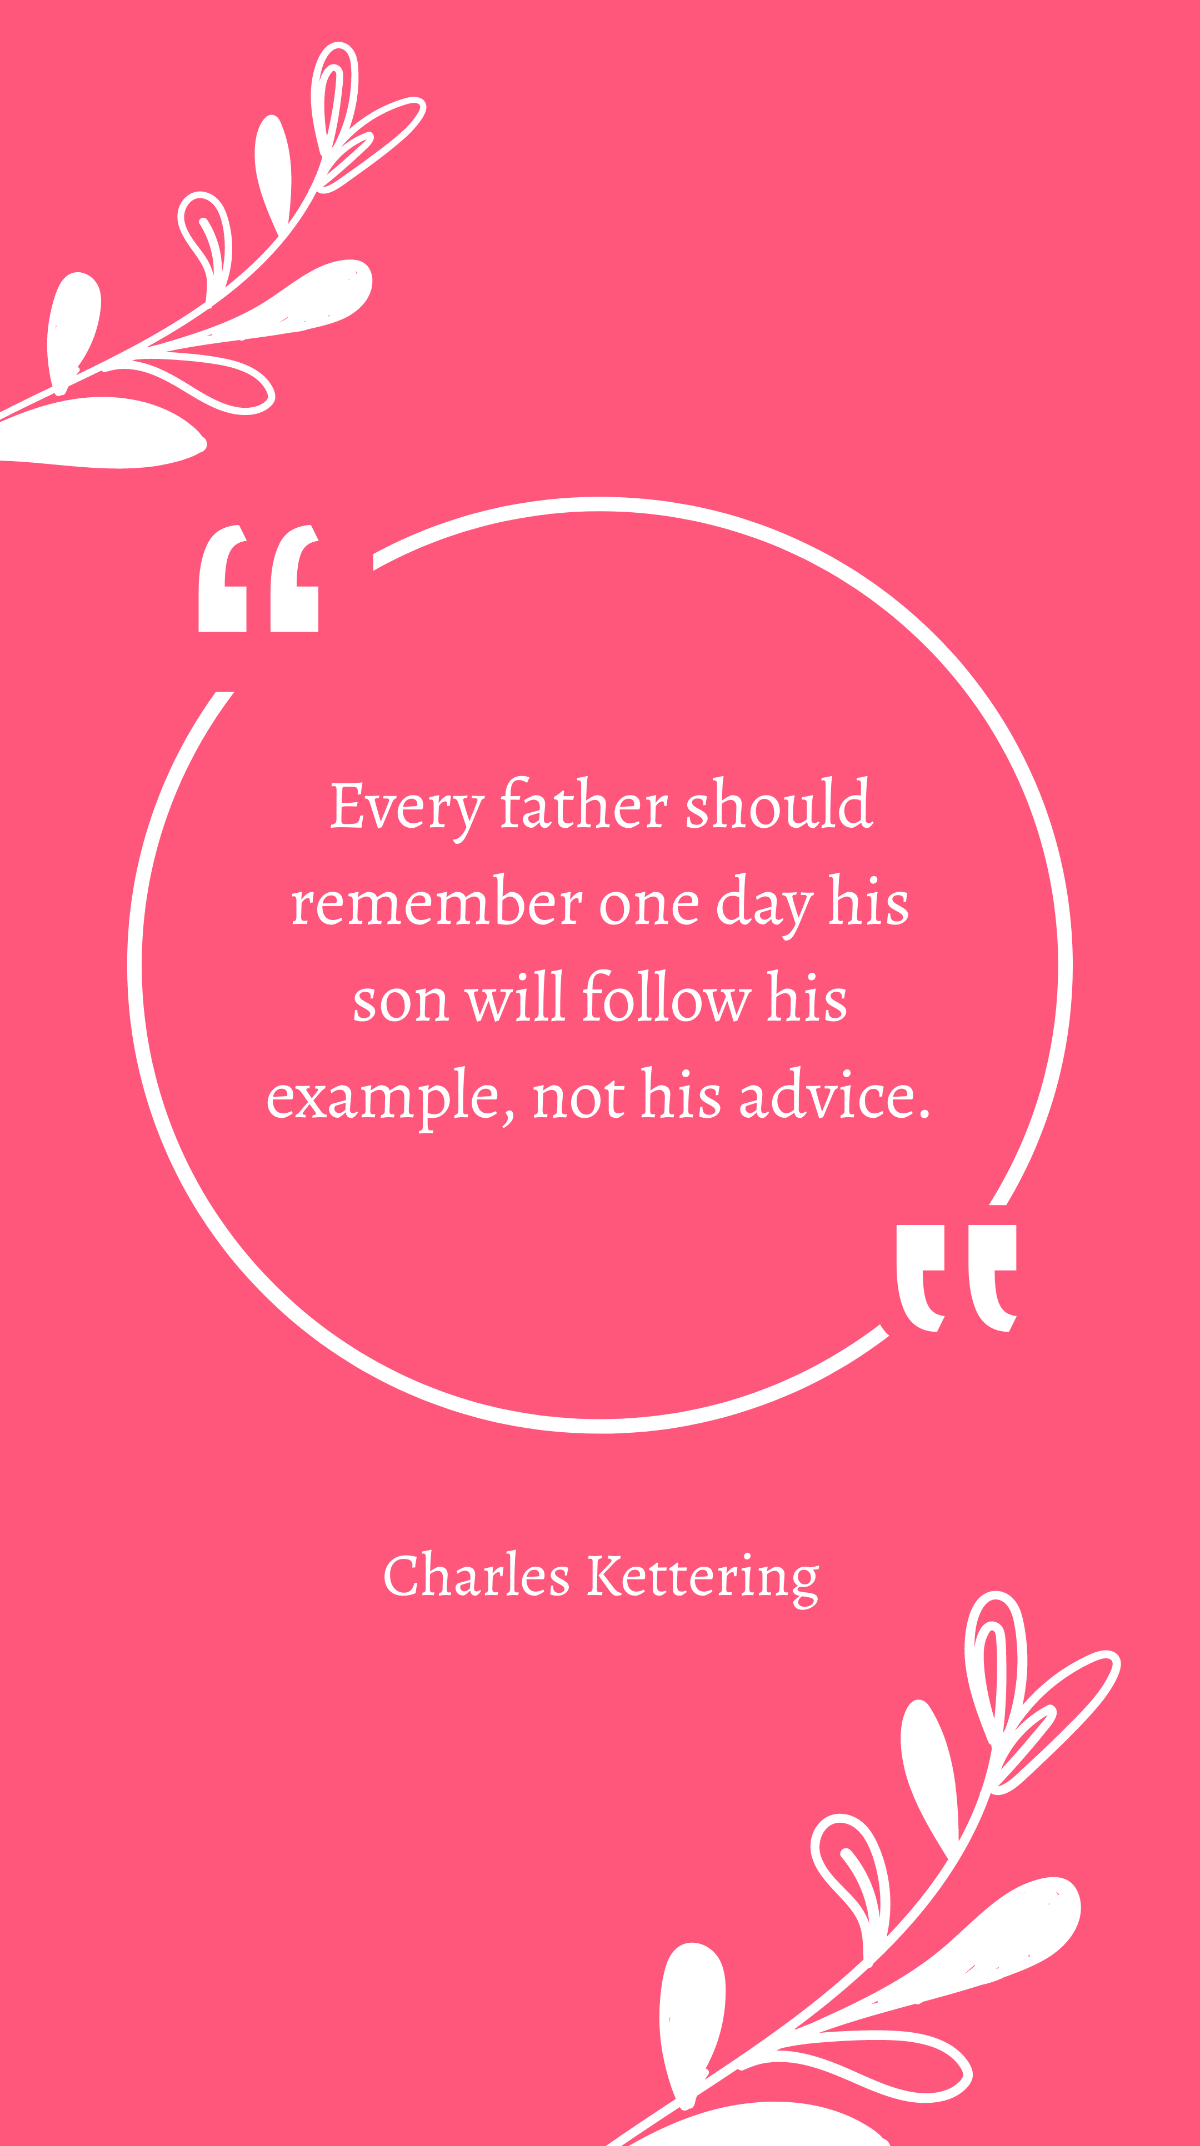 Charles Kettering - Every father should remember one day his son will follow his example, not his advice. Template